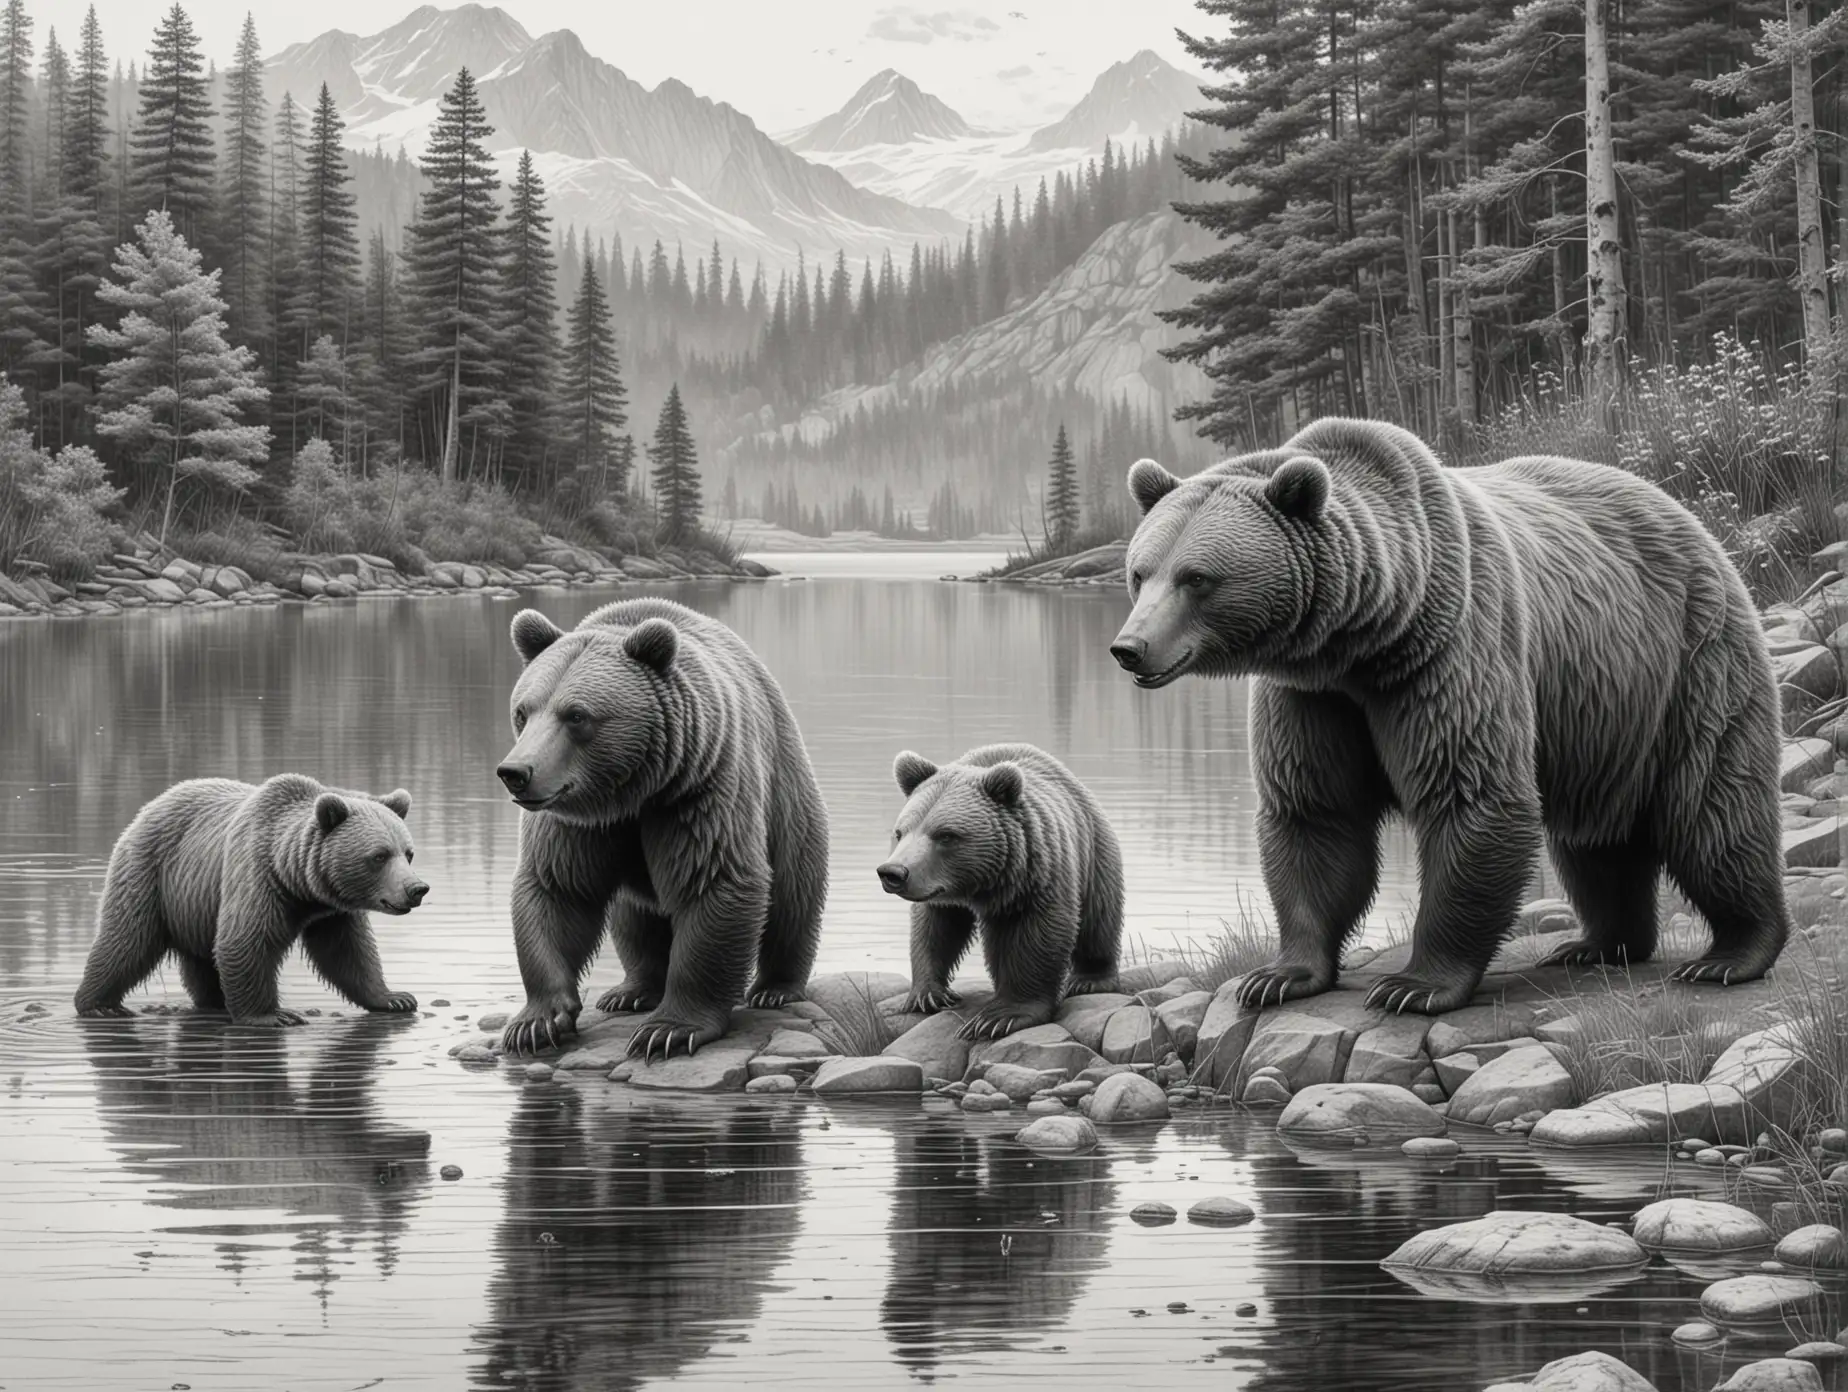 Realistic-Pencil-Drawing-of-Bears-by-the-Lake-Shore